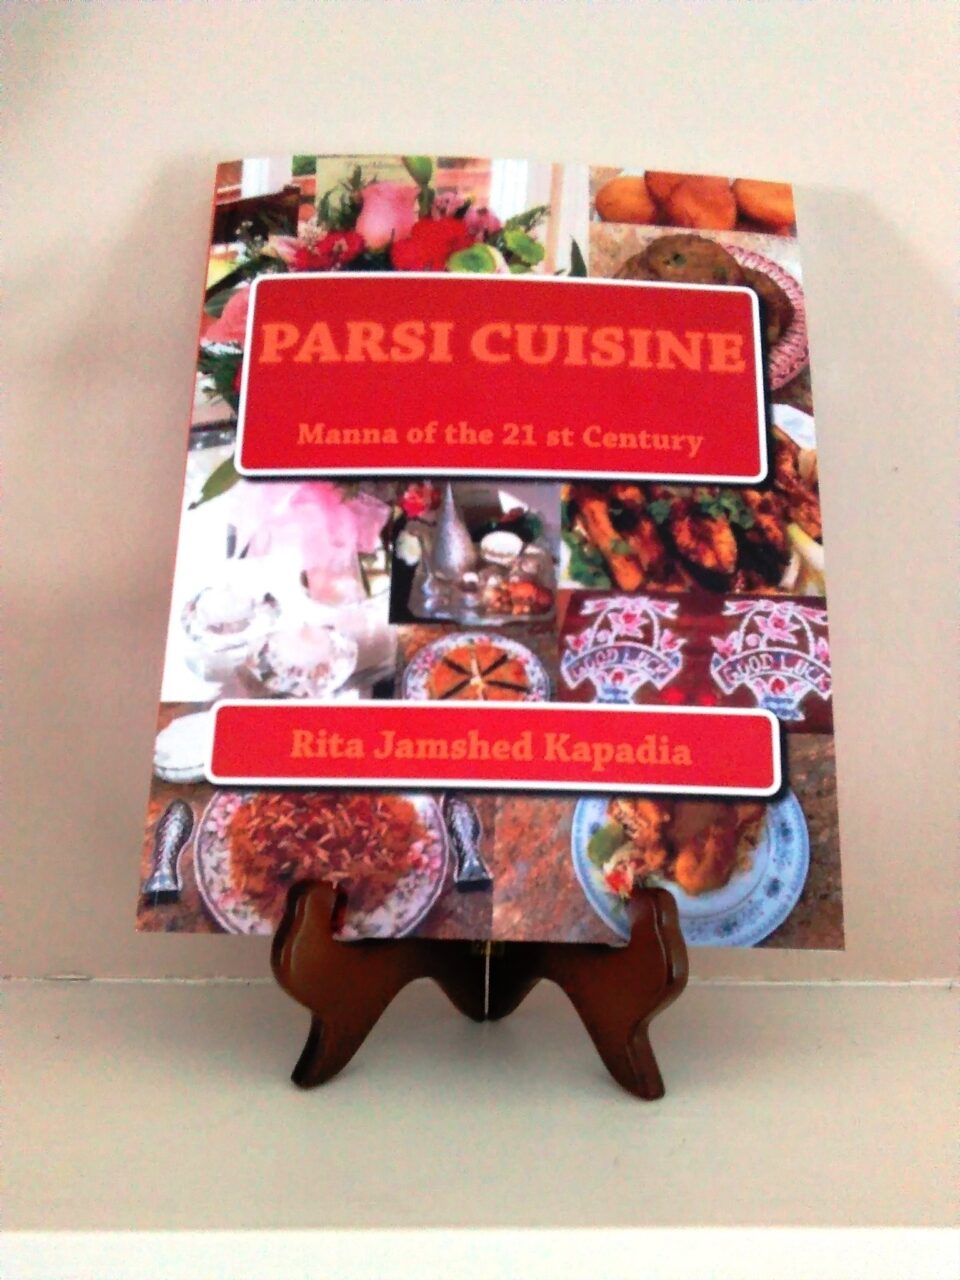 “Parsi Cuisine Manna of the 21st Century” cookbook available on Amazon Worldwide. Amazon Shop: https://www.amazon.com/shop/parsicuisine Other Books in the Parsi Cuisine Series by Rita Jamshed Kapadia. Place cursor to highlight cookbook link and see more details: Indian Parsi Kitchen Pickles, Chutney, Masala and Preserves Dhansak Celebrations: Celebrating Zoroastrian Festivals and Traditions (ParsiCuisine) Vegetarian Delights Parsi Custards and Egg Dishes Seafoods Desserts Cooking for Kids Tea of India Mastering Parsi Cuisine Mawa Cake Lovers Vividh Vani by Meherbai Jamshedji Nusserwanji Wadia Paperback . (Volume 1 & 2): In Gujarati